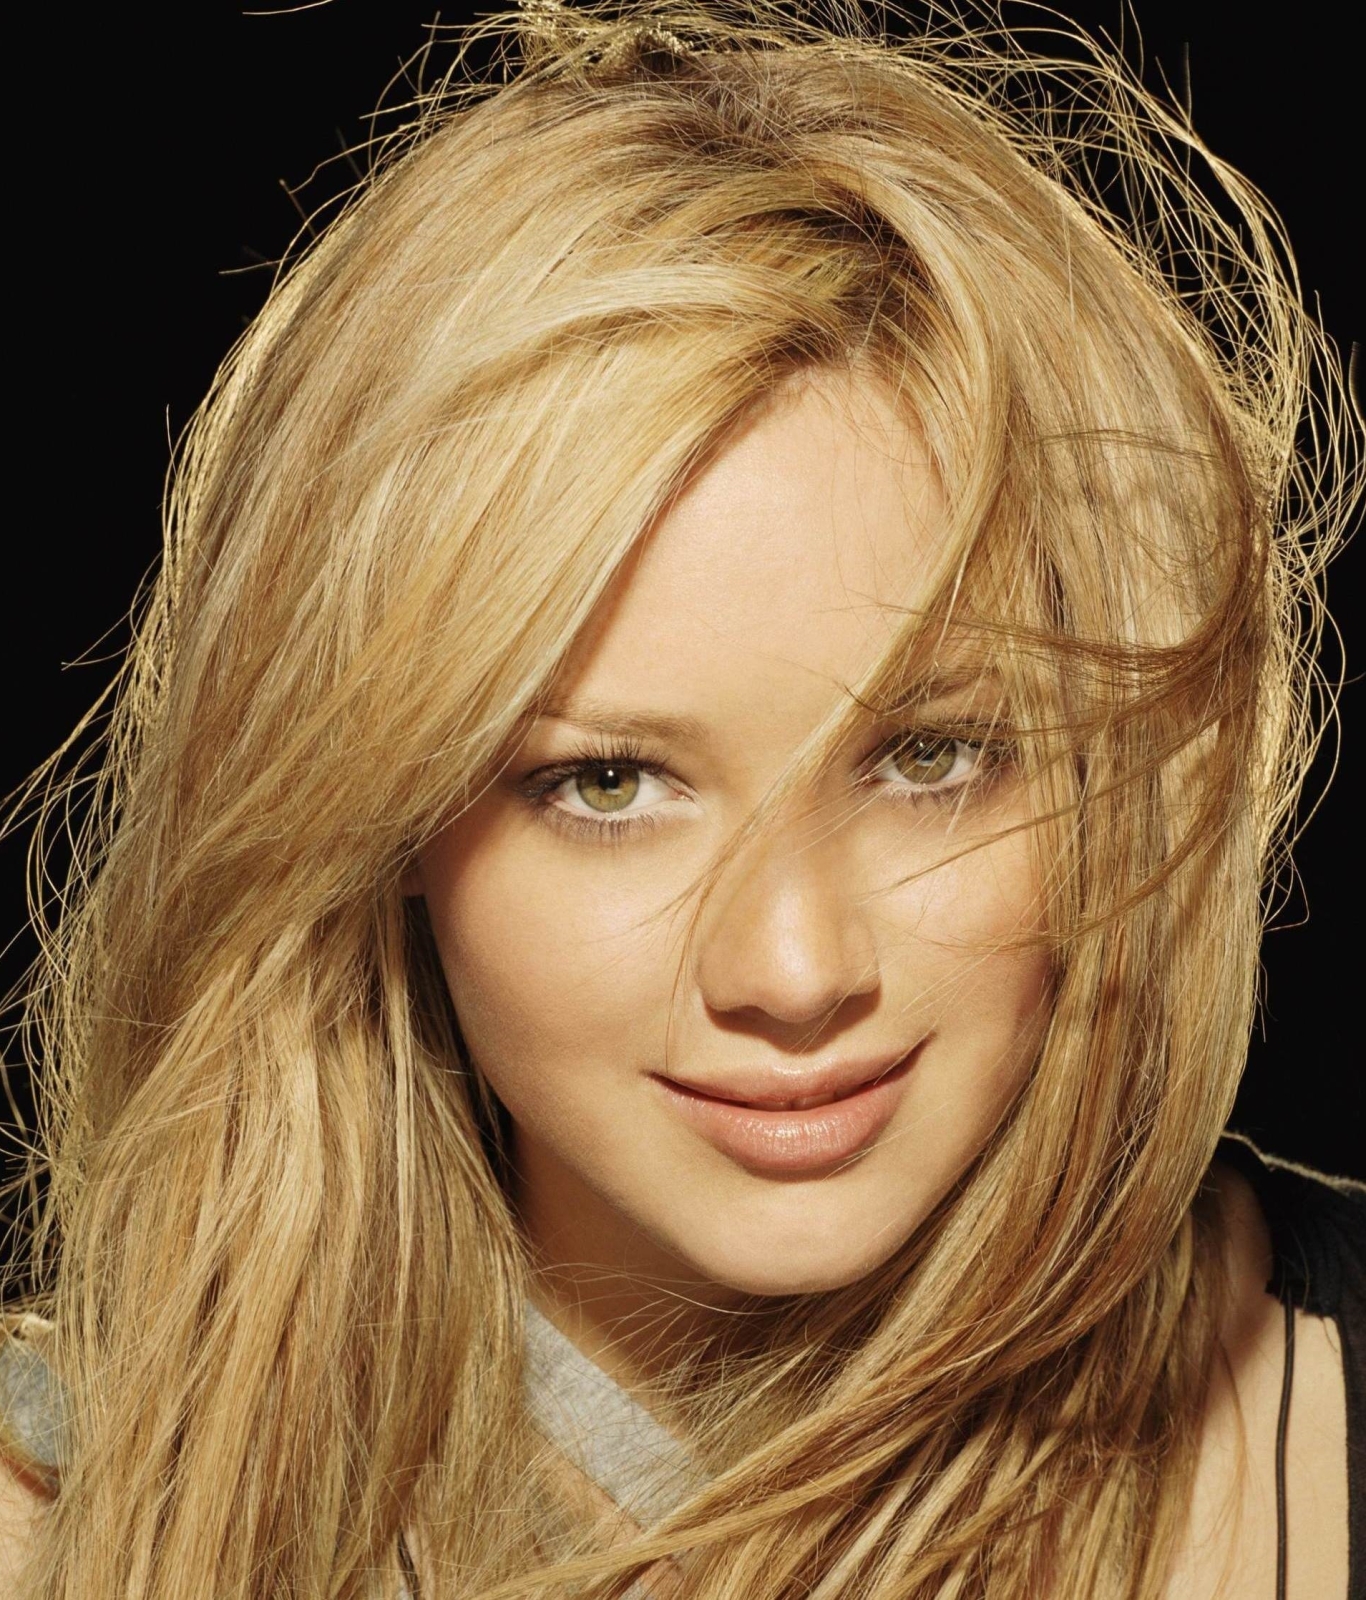 1366x1600 Resolution Hilary Duff Cute Smile Pic 1366x1600 Resolution Wallpaper Wallpapers Den 